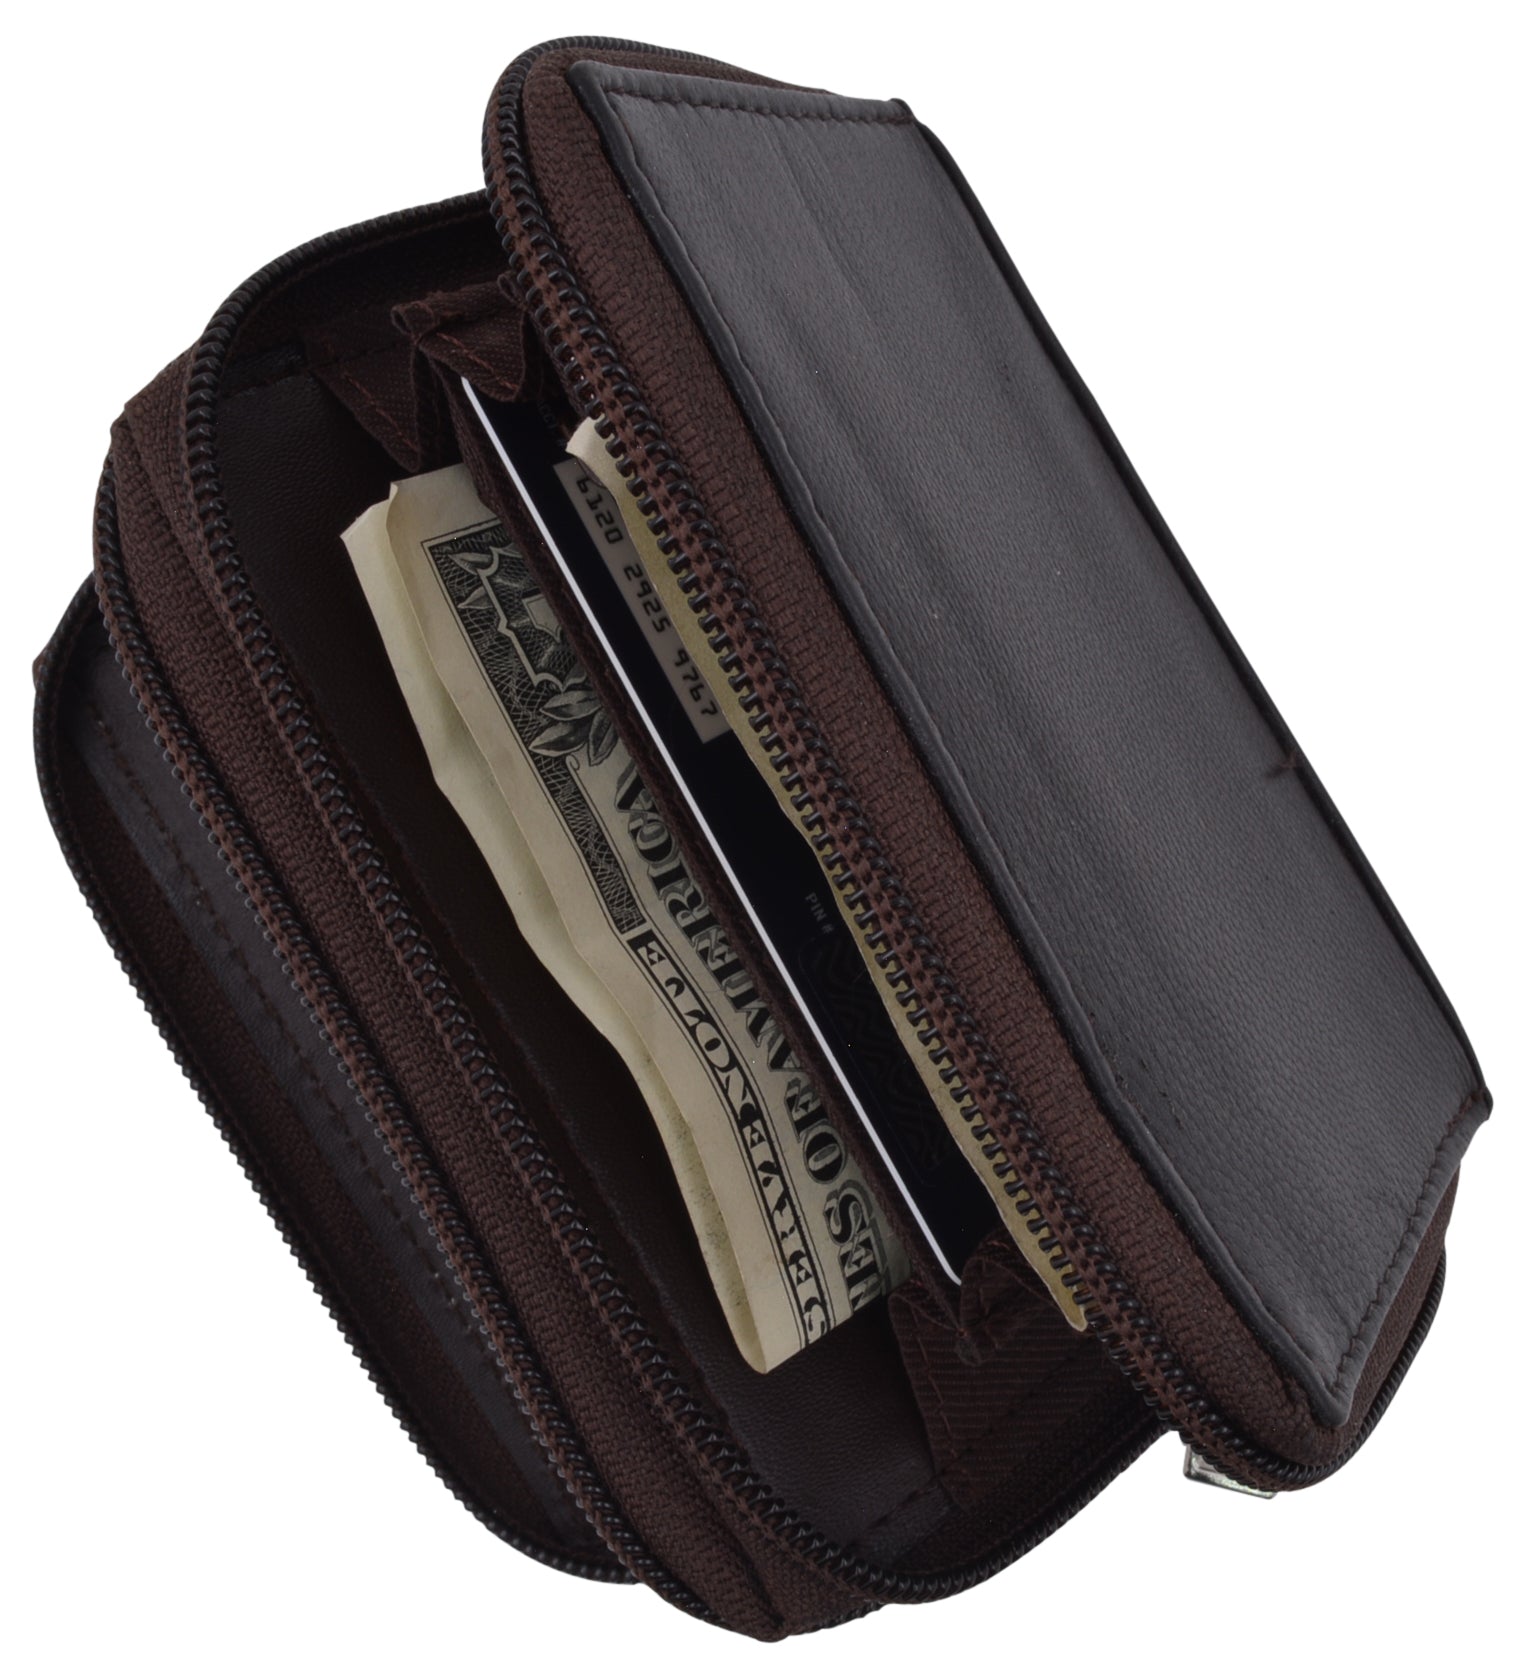 Leather Credit Card Holder 15 Slots, Id Card Organizer for Women & Men  Accordion Wallet with Zipper C-B-B2 (Brown)